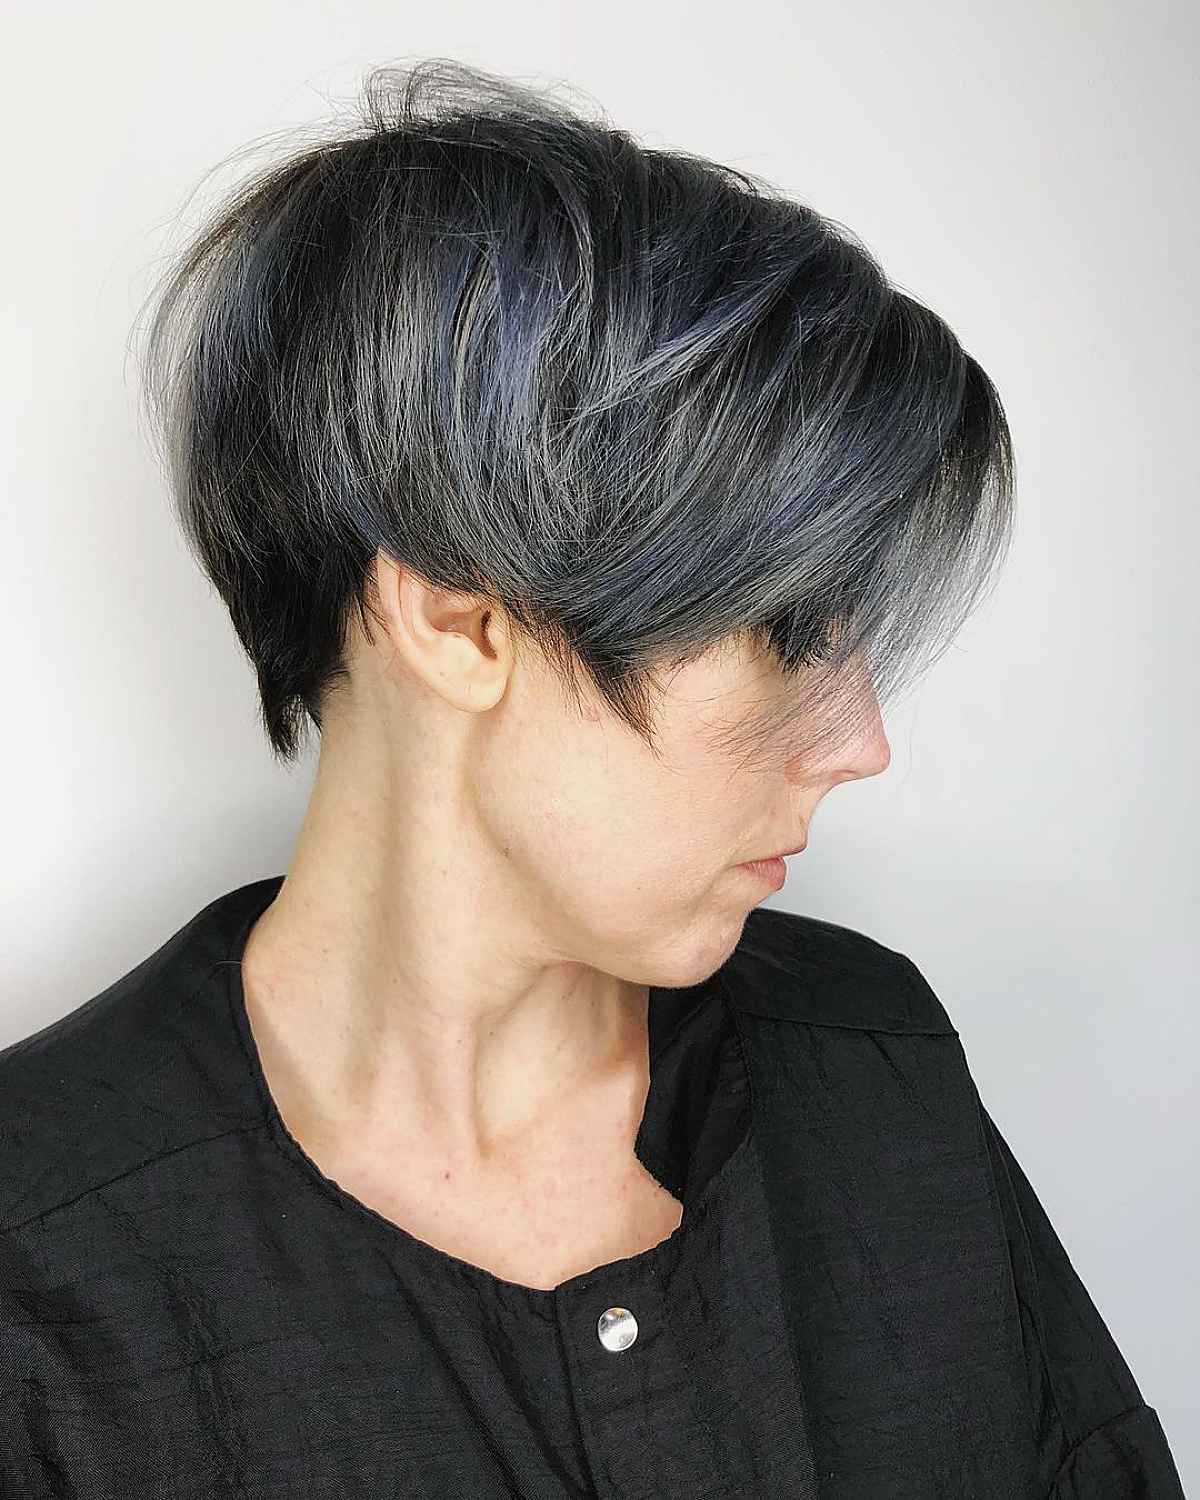 Pixie Crop with a Charcoal Gray Color